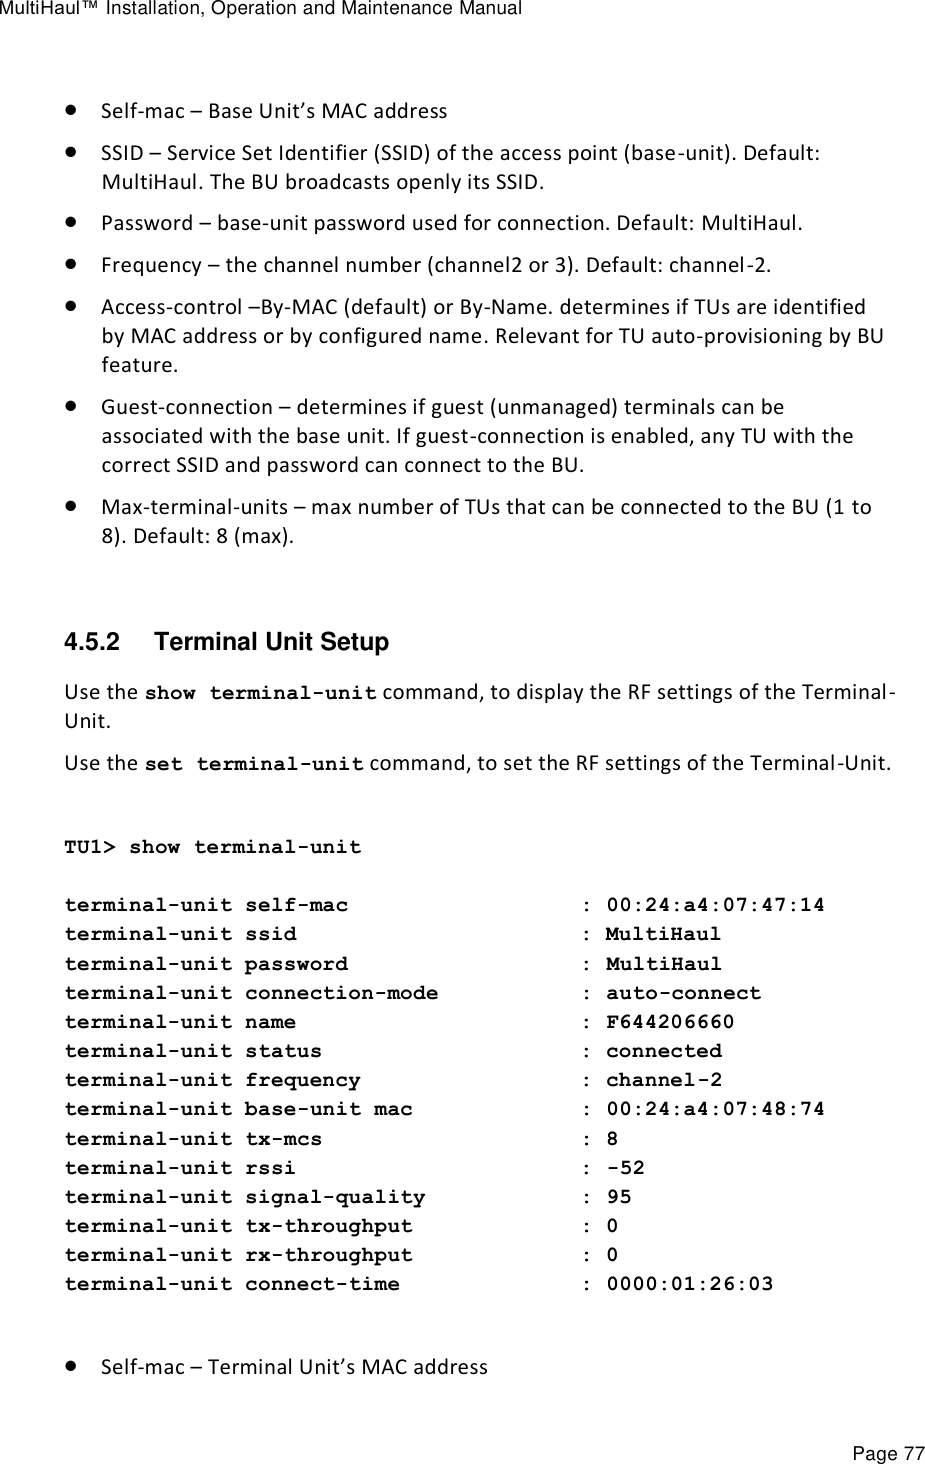 MultiHaul™ Installation, Operation and Maintenance Manual Page 77   Self-mac – Base Unit’s MAC address  SSID – Service Set Identifier (SSID) of the access point (base-unit). Default: MultiHaul. The BU broadcasts openly its SSID.  Password – base-unit password used for connection. Default: MultiHaul.  Frequency – the channel number (channel2 or 3). Default: channel-2.  Access-control –By-MAC (default) or By-Name. determines if TUs are identified by MAC address or by configured name. Relevant for TU auto-provisioning by BU feature.  Guest-connection – determines if guest (unmanaged) terminals can be associated with the base unit. If guest-connection is enabled, any TU with the correct SSID and password can connect to the BU.  Max-terminal-units – max number of TUs that can be connected to the BU (1 to 8). Default: 8 (max).  4.5.2  Terminal Unit Setup Use the show terminal-unit command, to display the RF settings of the Terminal-Unit. Use the set terminal-unit command, to set the RF settings of the Terminal-Unit.  TU1&gt; show terminal-unit  terminal-unit self-mac                  : 00:24:a4:07:47:14 terminal-unit ssid                      : MultiHaul terminal-unit password                  : MultiHaul terminal-unit connection-mode           : auto-connect terminal-unit name                      : F644206660 terminal-unit status                    : connected terminal-unit frequency                 : channel-2 terminal-unit base-unit mac             : 00:24:a4:07:48:74 terminal-unit tx-mcs                    : 8 terminal-unit rssi                      : -52 terminal-unit signal-quality            : 95 terminal-unit tx-throughput             : 0 terminal-unit rx-throughput             : 0 terminal-unit connect-time              : 0000:01:26:03   Self-mac – Terminal Unit’s MAC address 